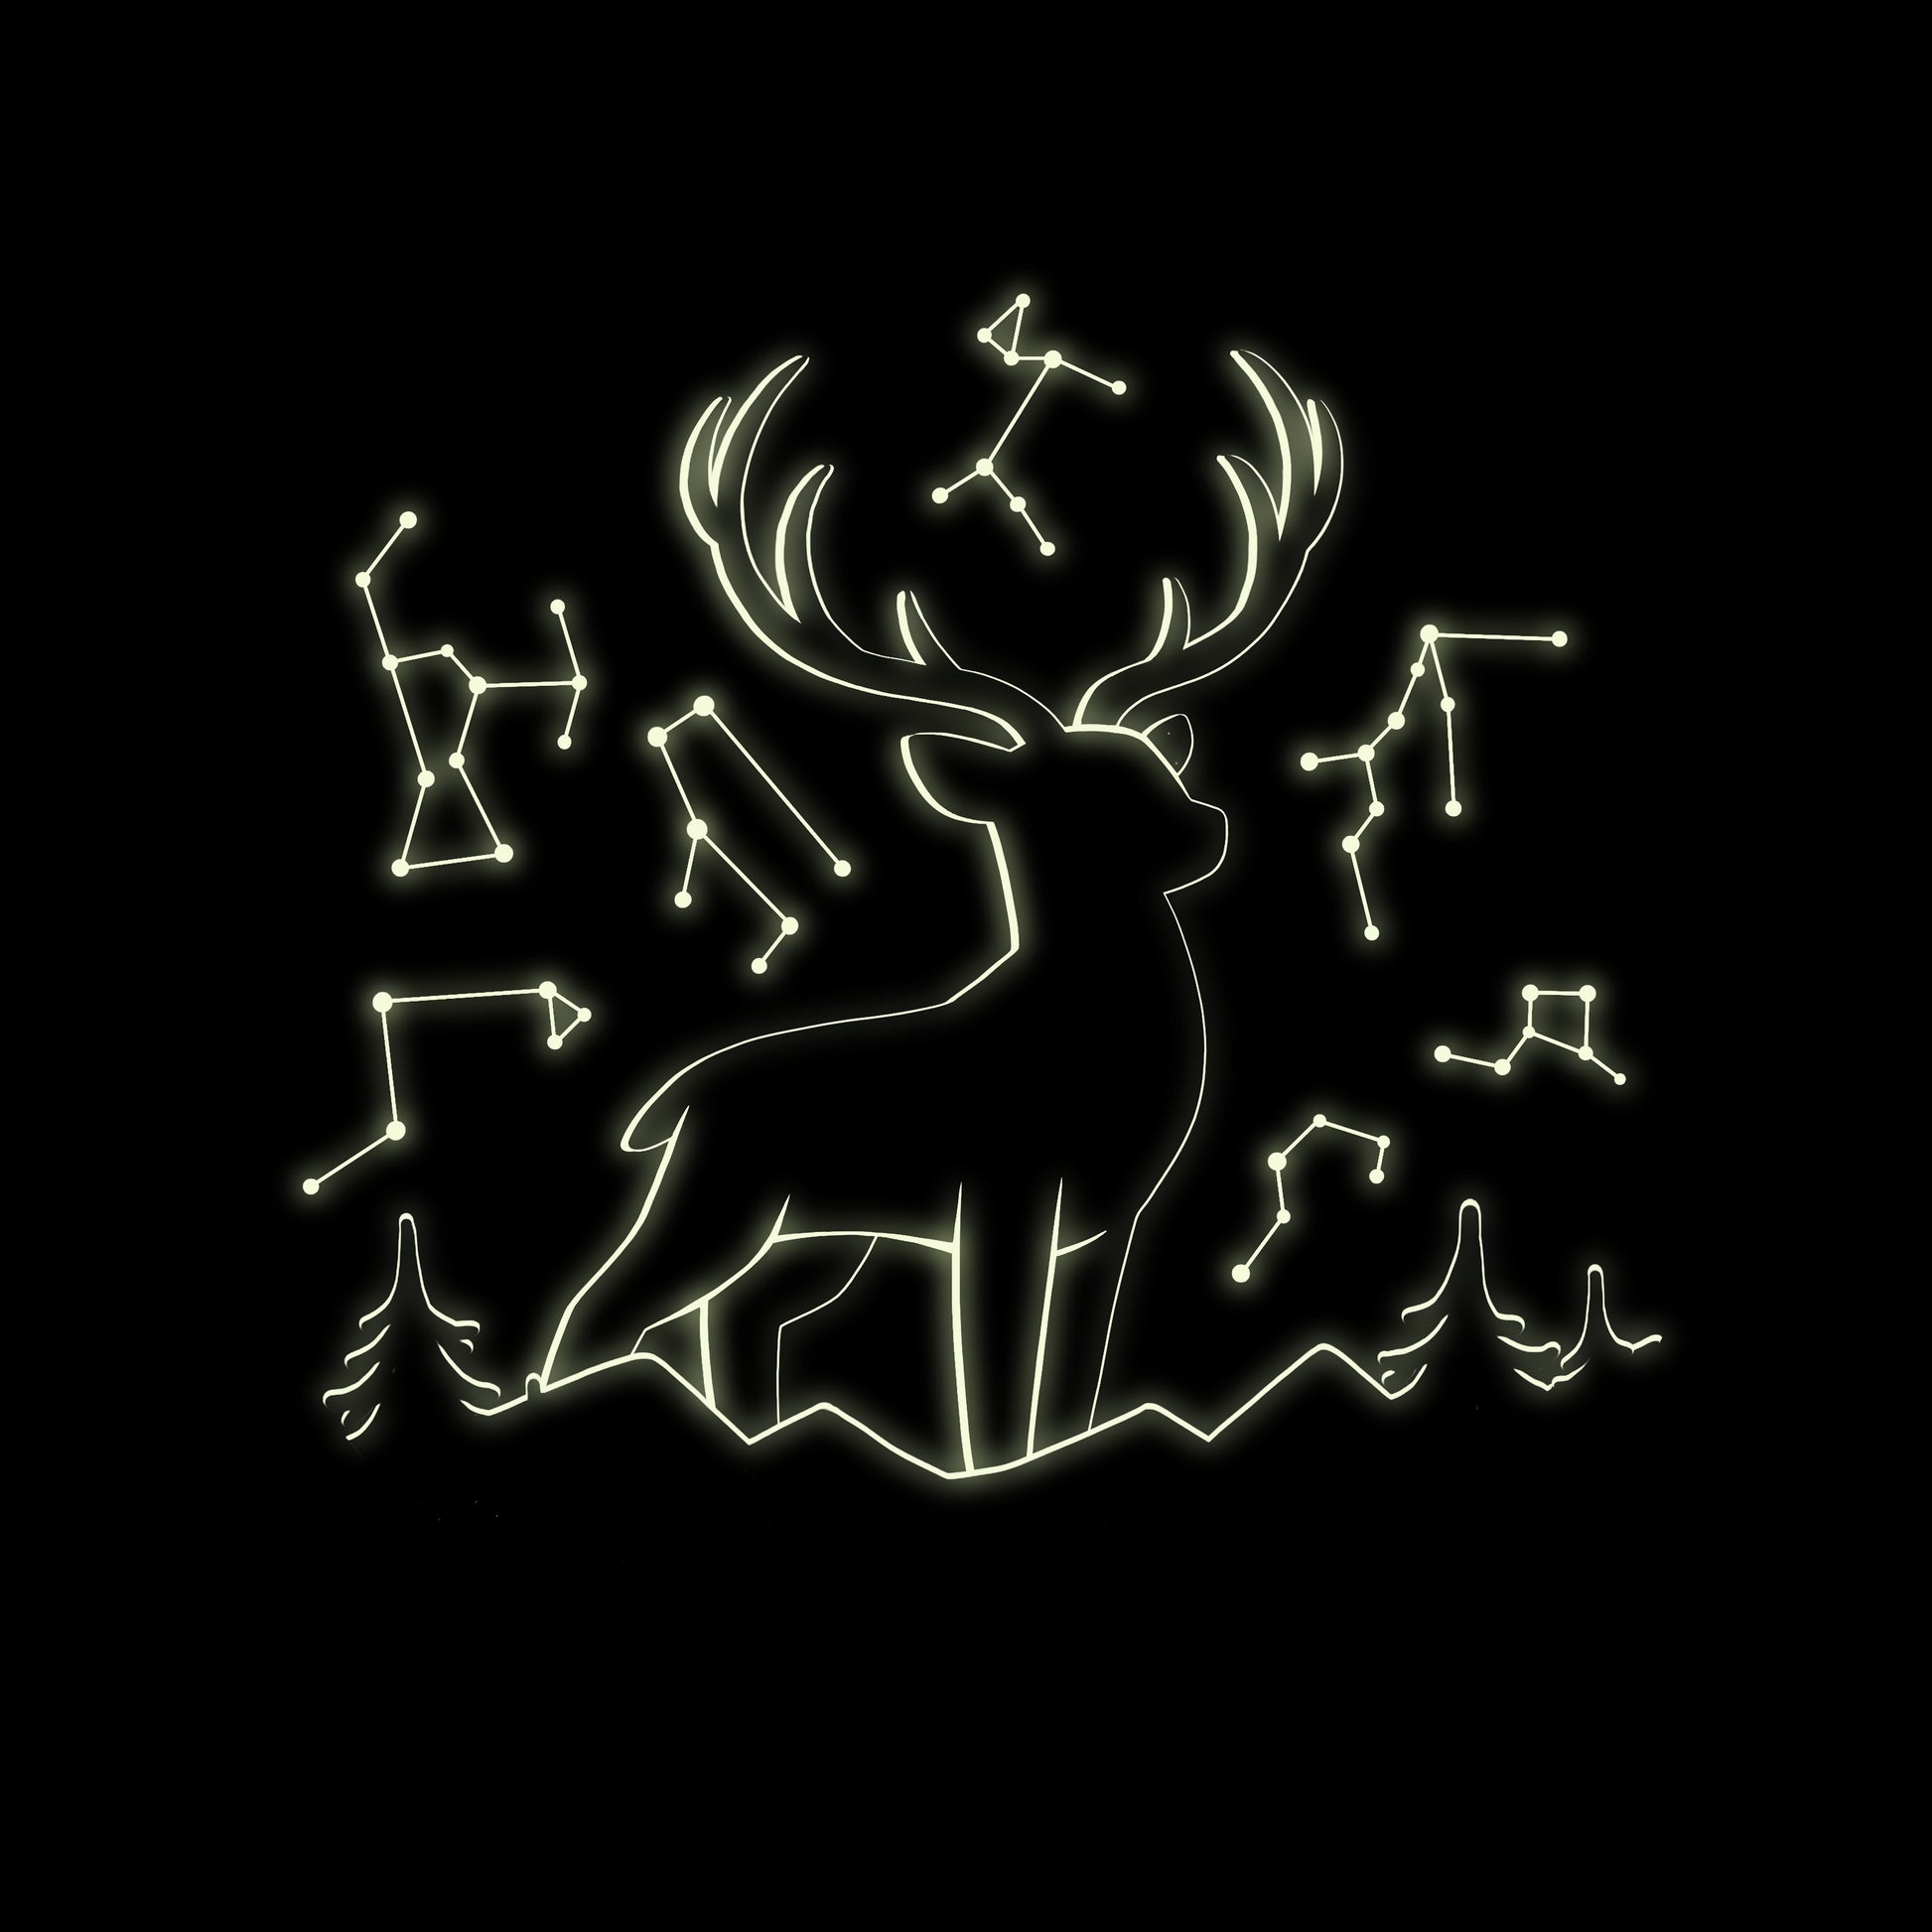 A Celestial Stag (Glow) by TeeTurtle with constellations on a black background.